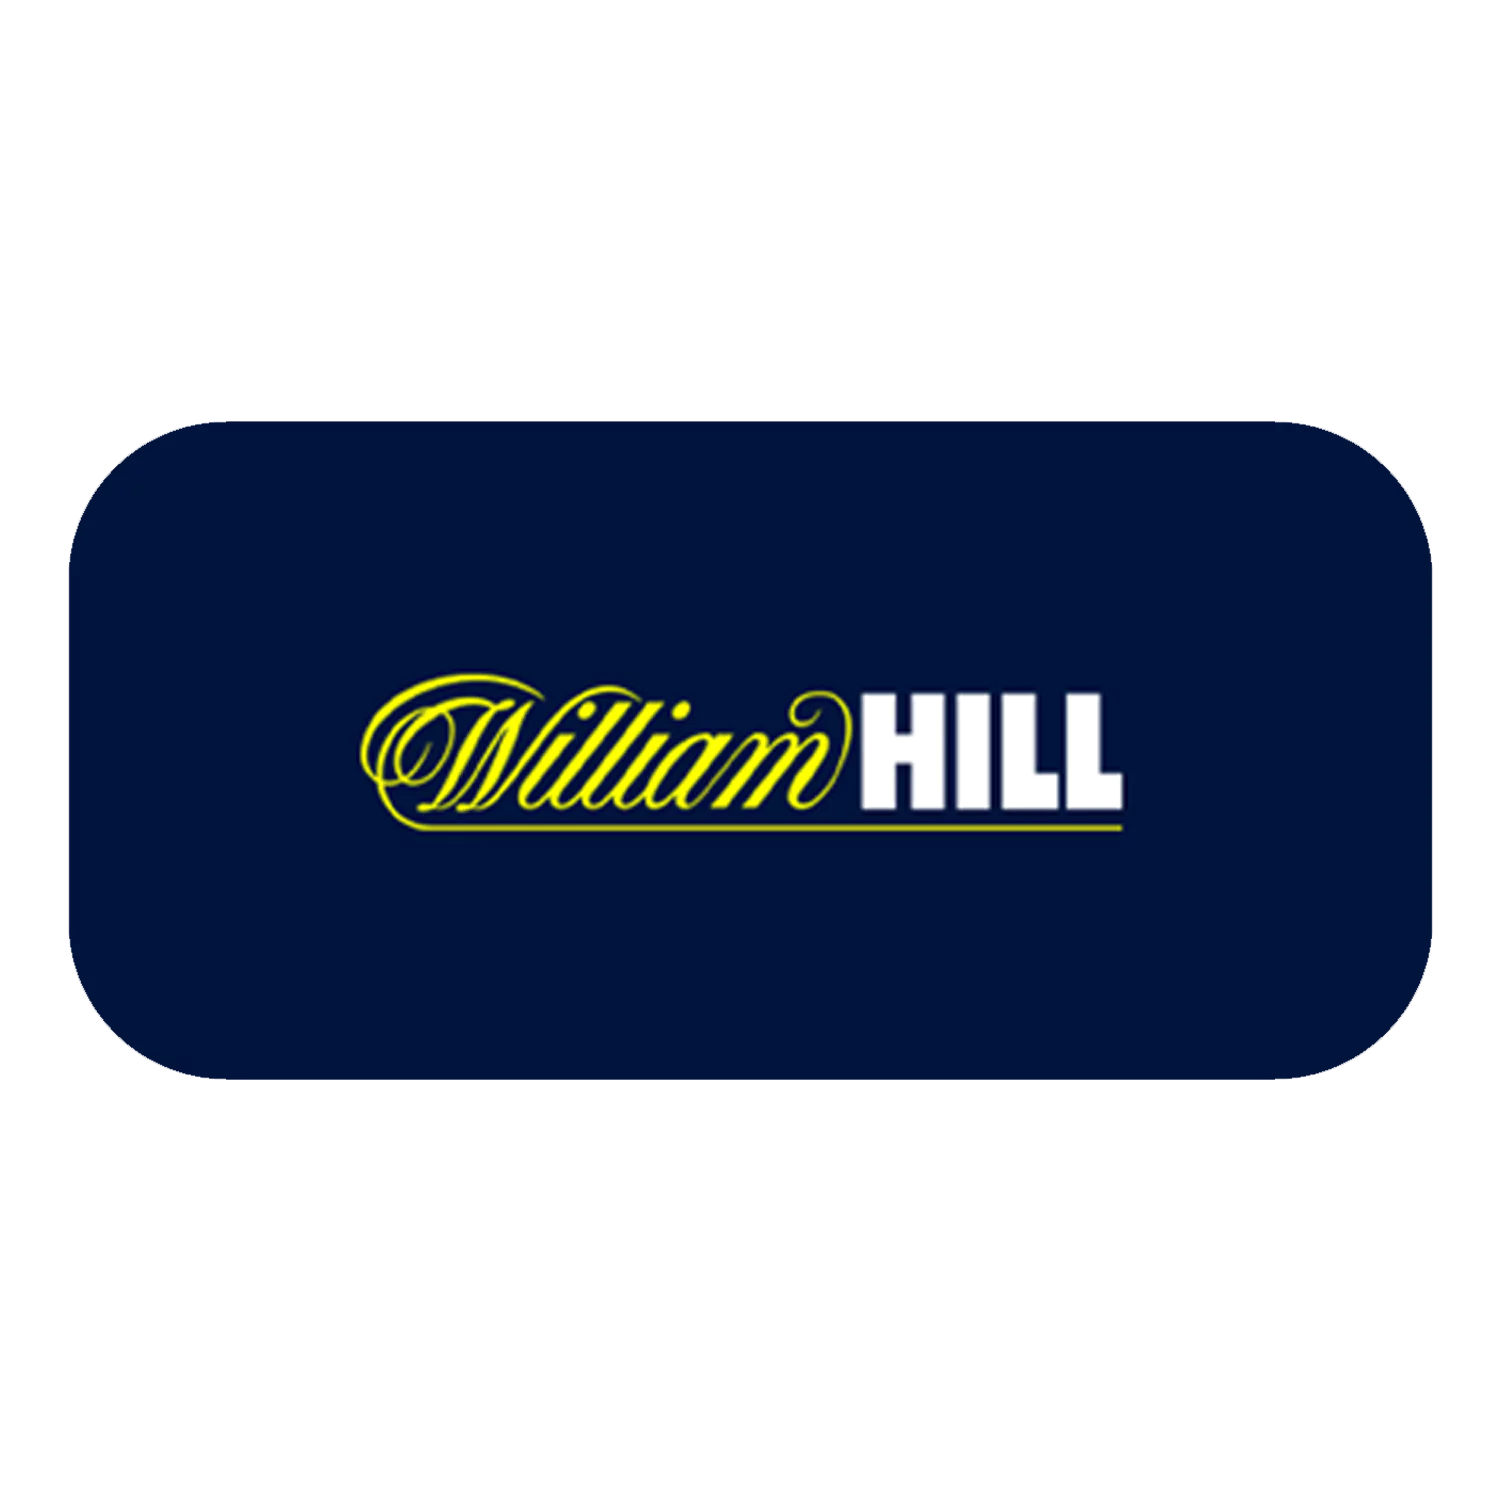 William Hill was held in 1934, but its sportsbook appeared only this century.